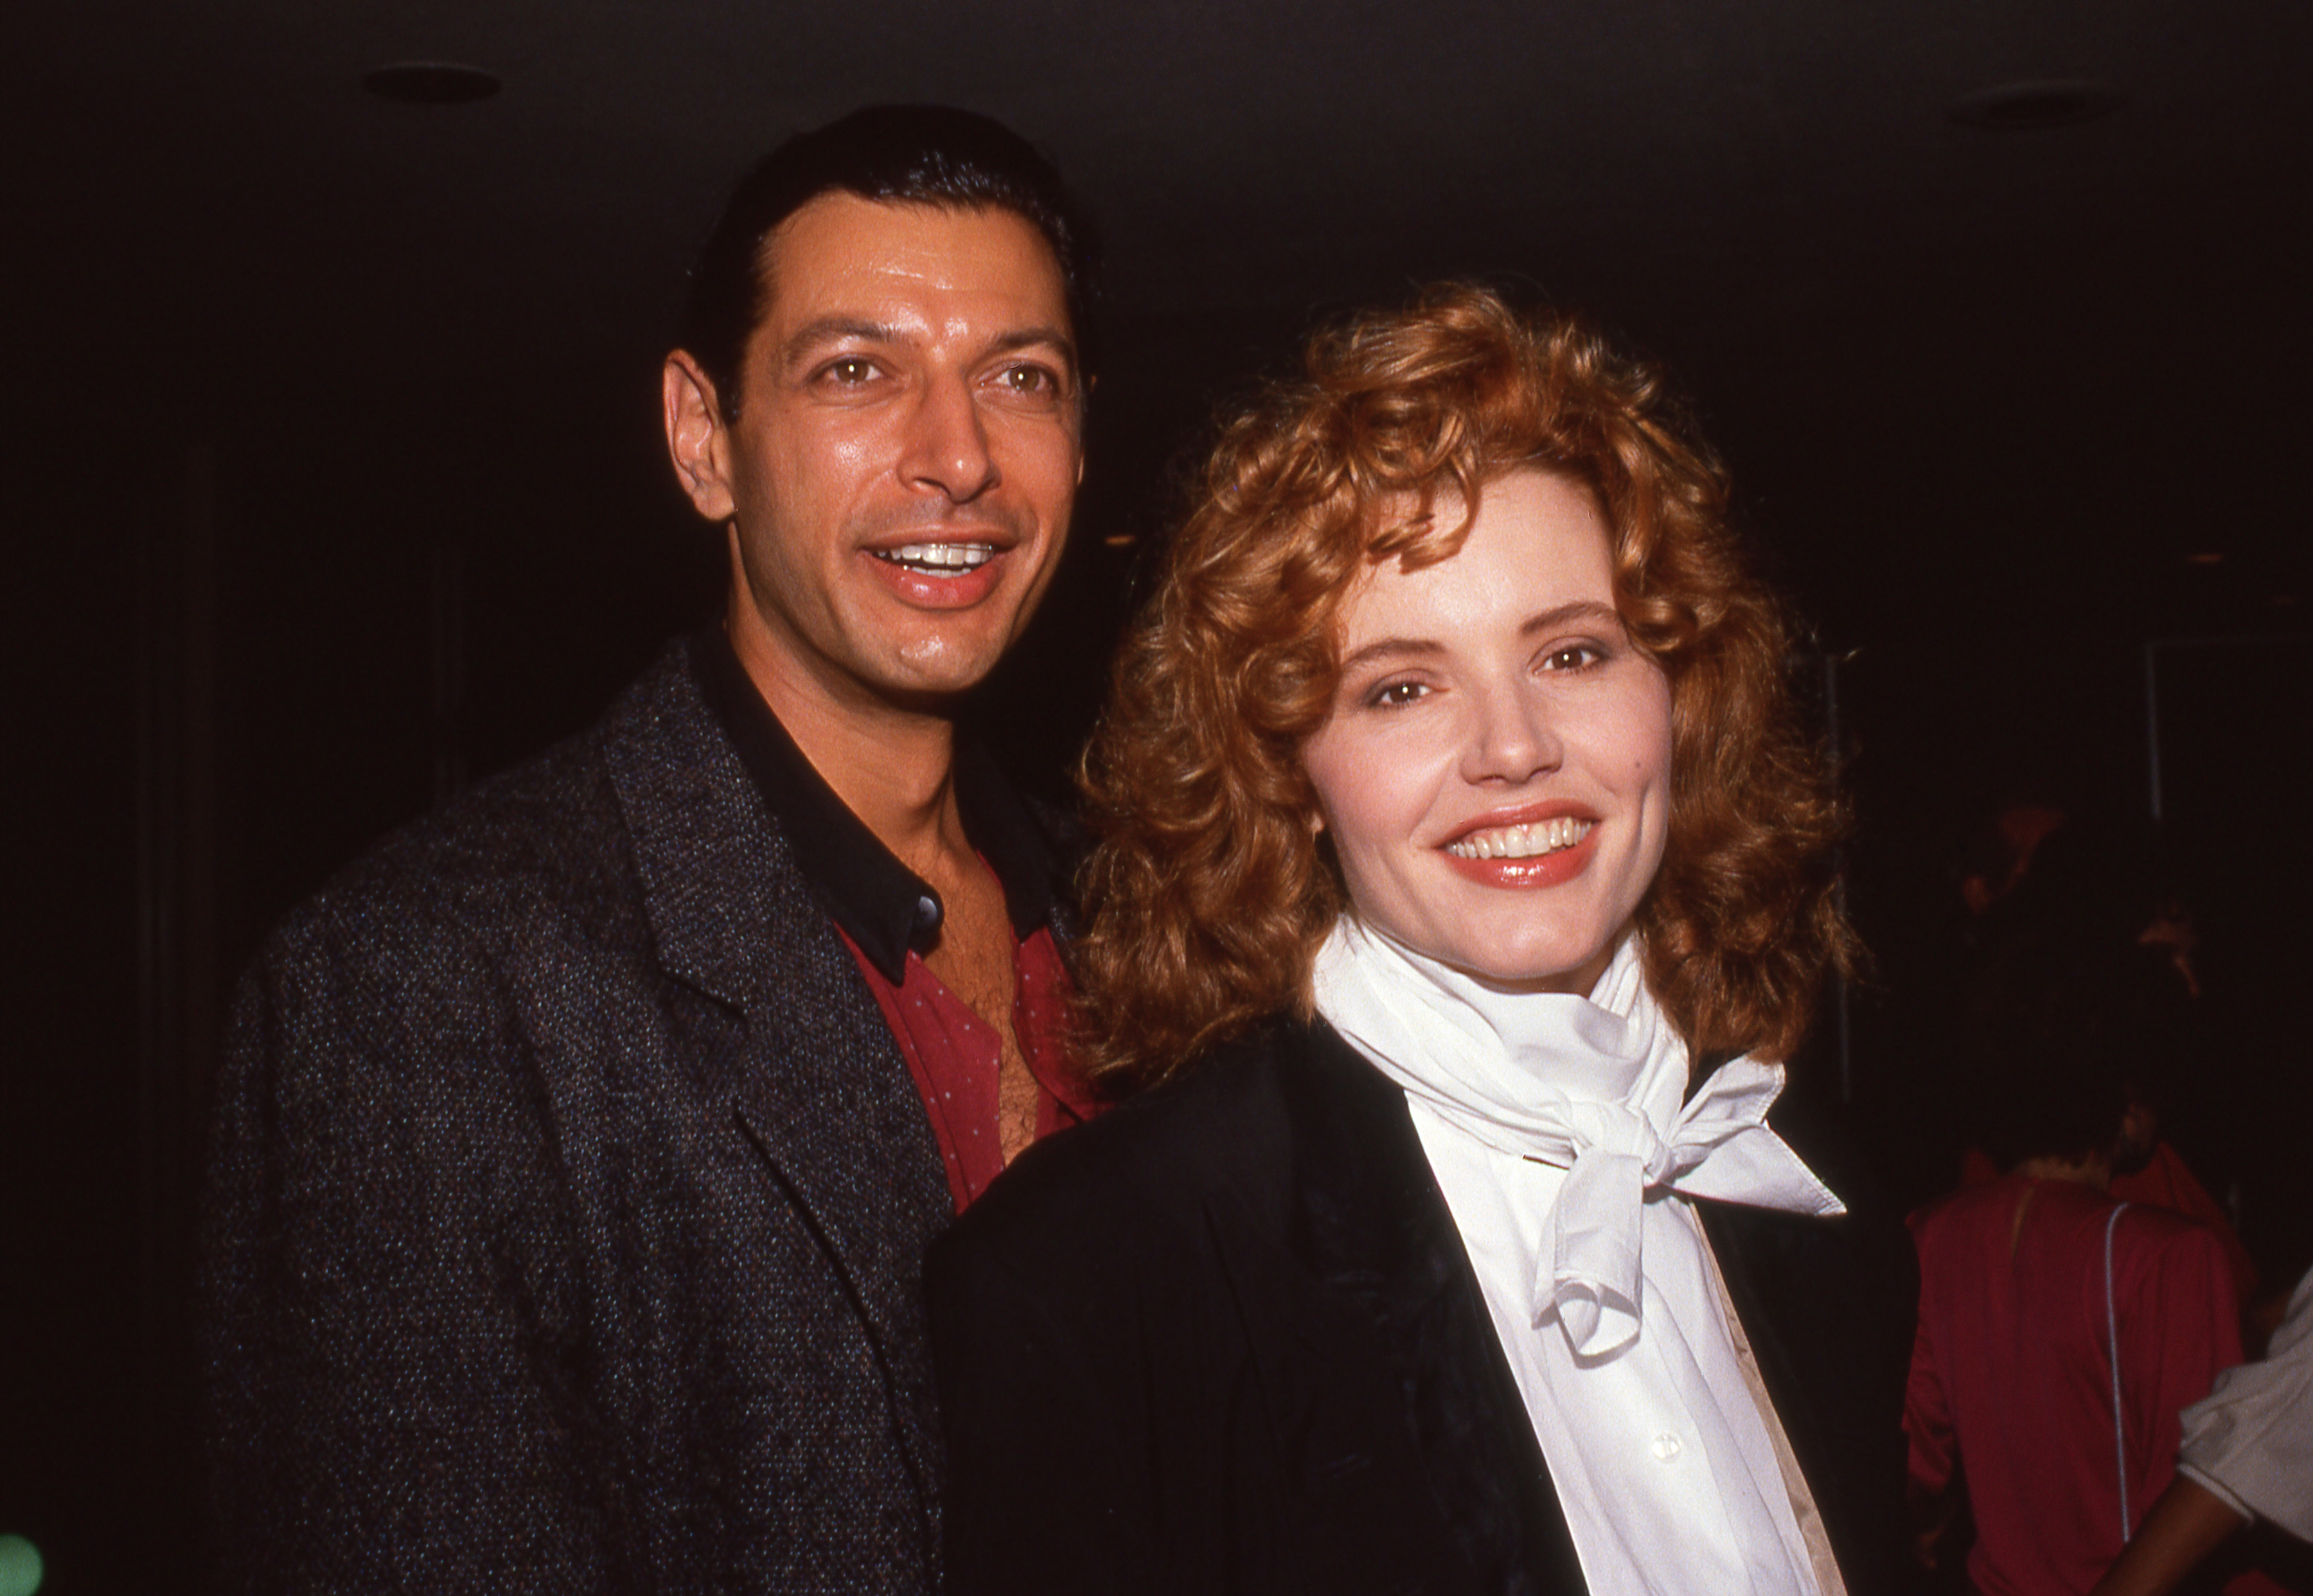 Jeff Goldblum and Geena Davis photographed together in 1988 | Source: Getty Images